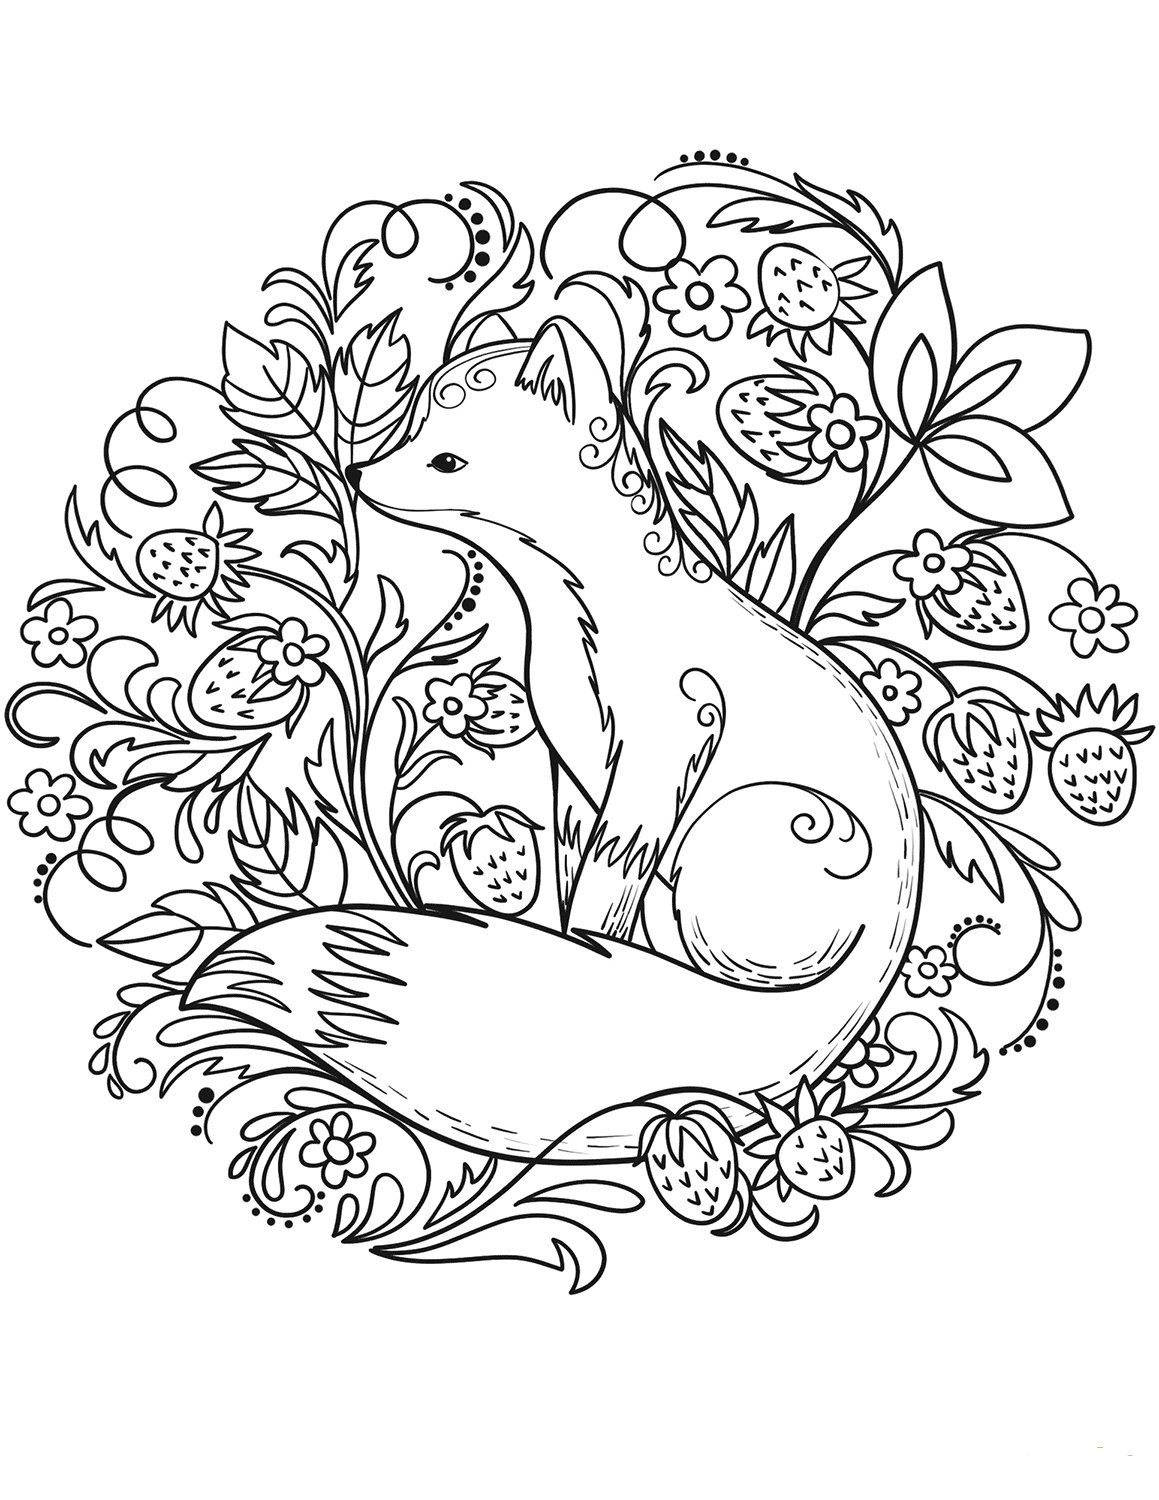 Fox And Strawberry Coloring Page